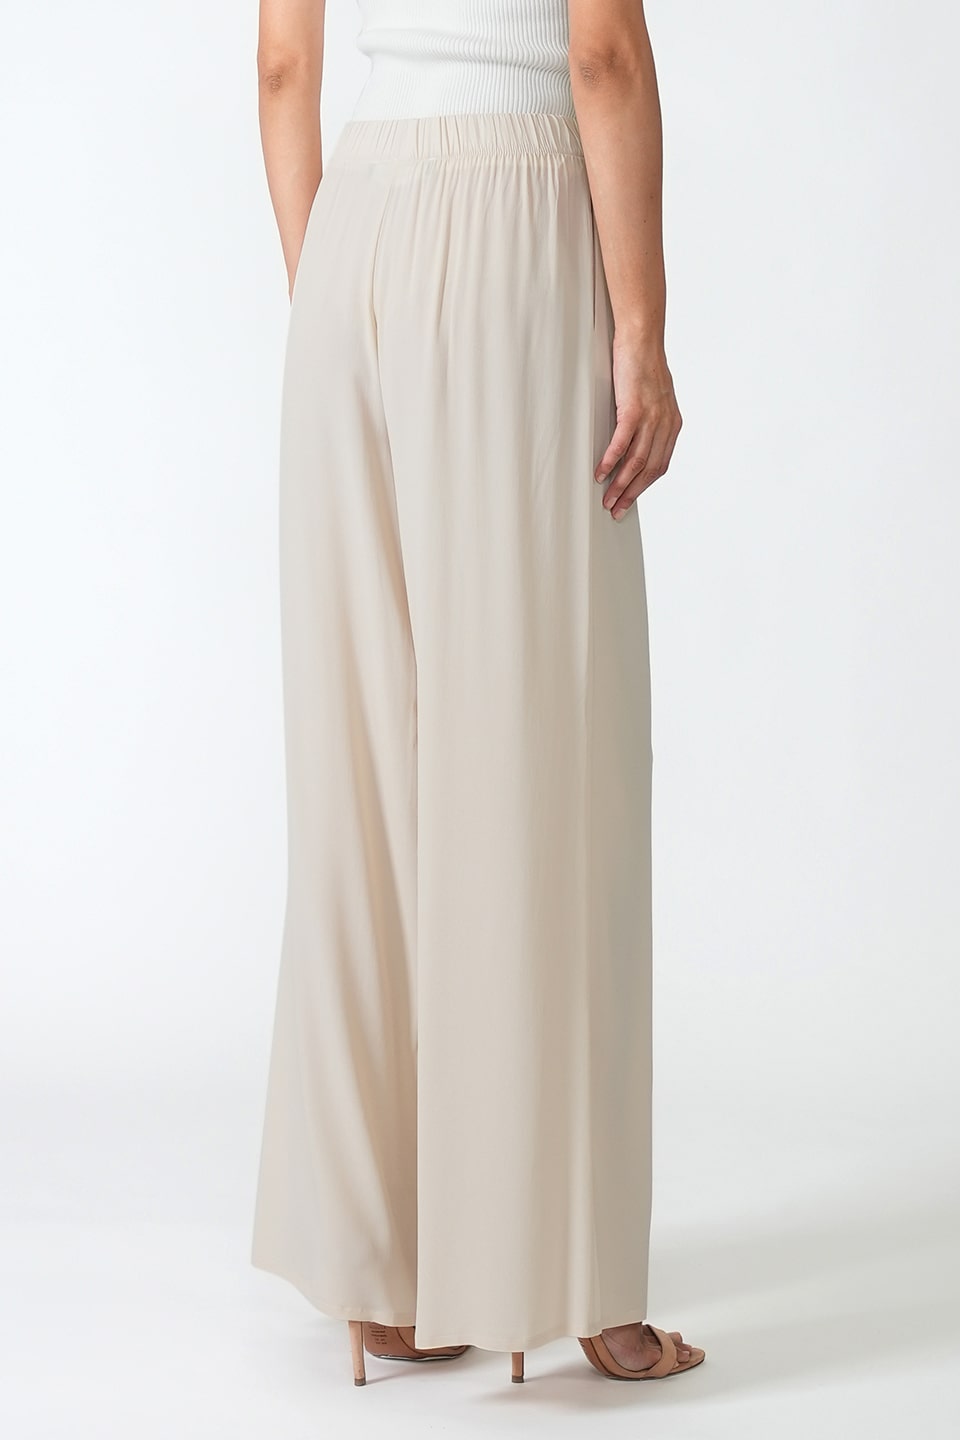 Designer Ivory Women pants, shop online with free delivery in UAE. Product gallery 6